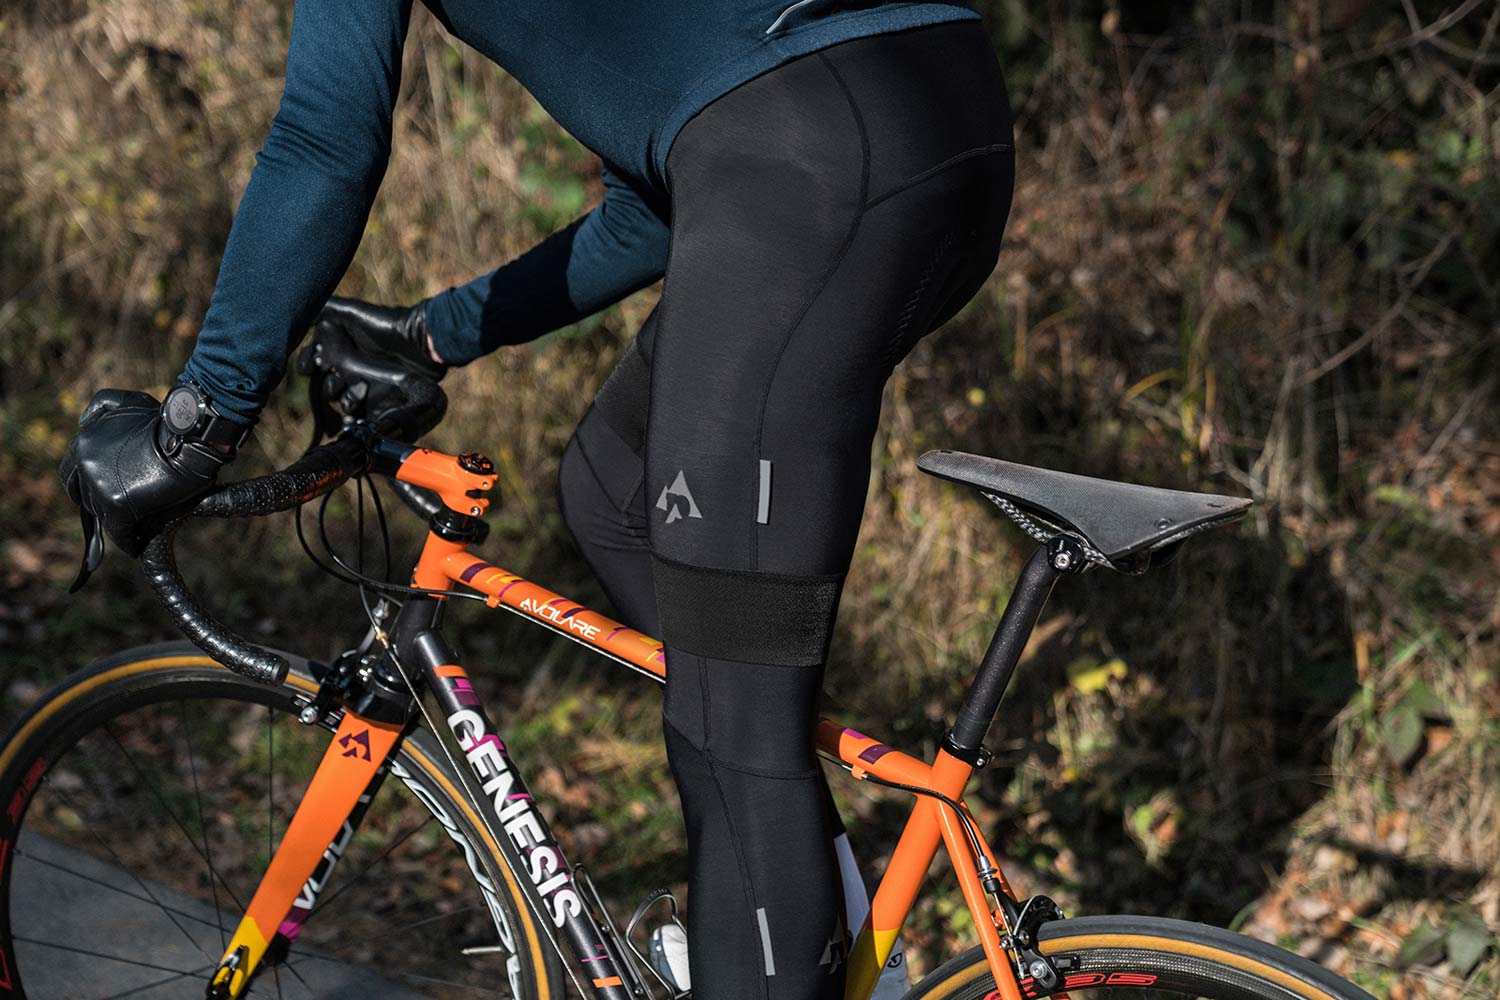 Review: Podia Merino, a lightweight long sleeve jersey for cooler